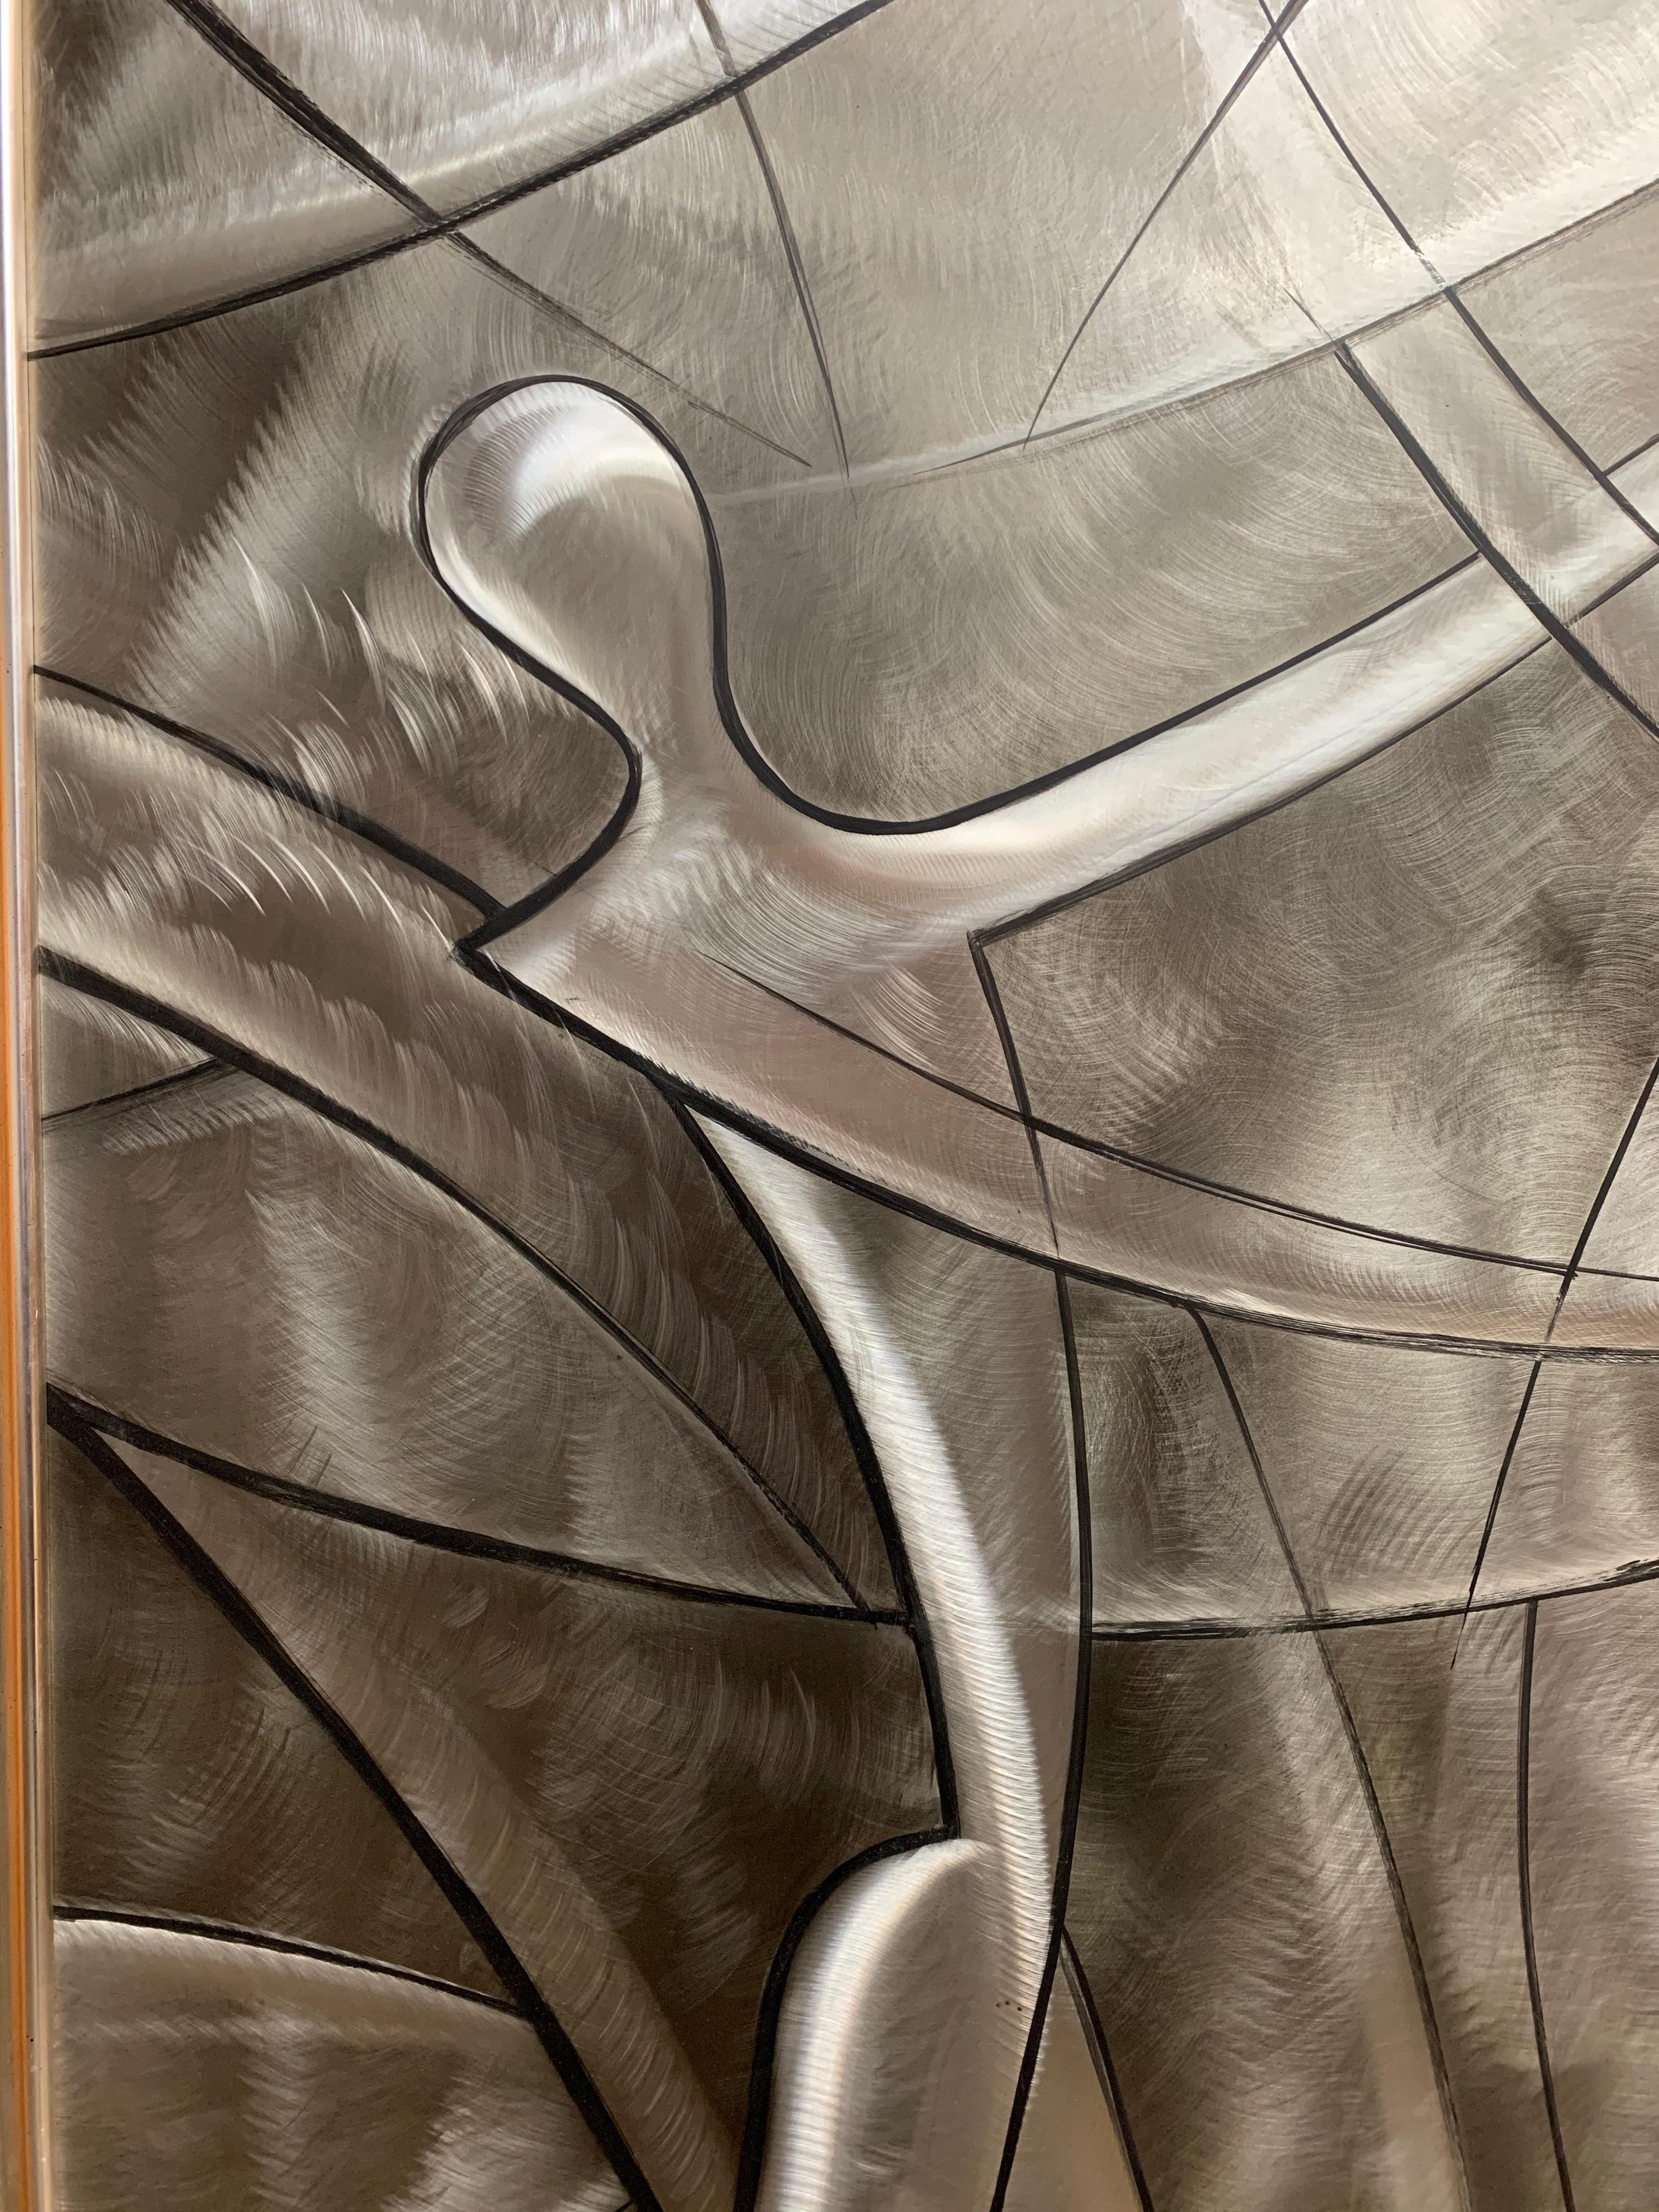 Etched stainless steel with paint accents wall art titled 